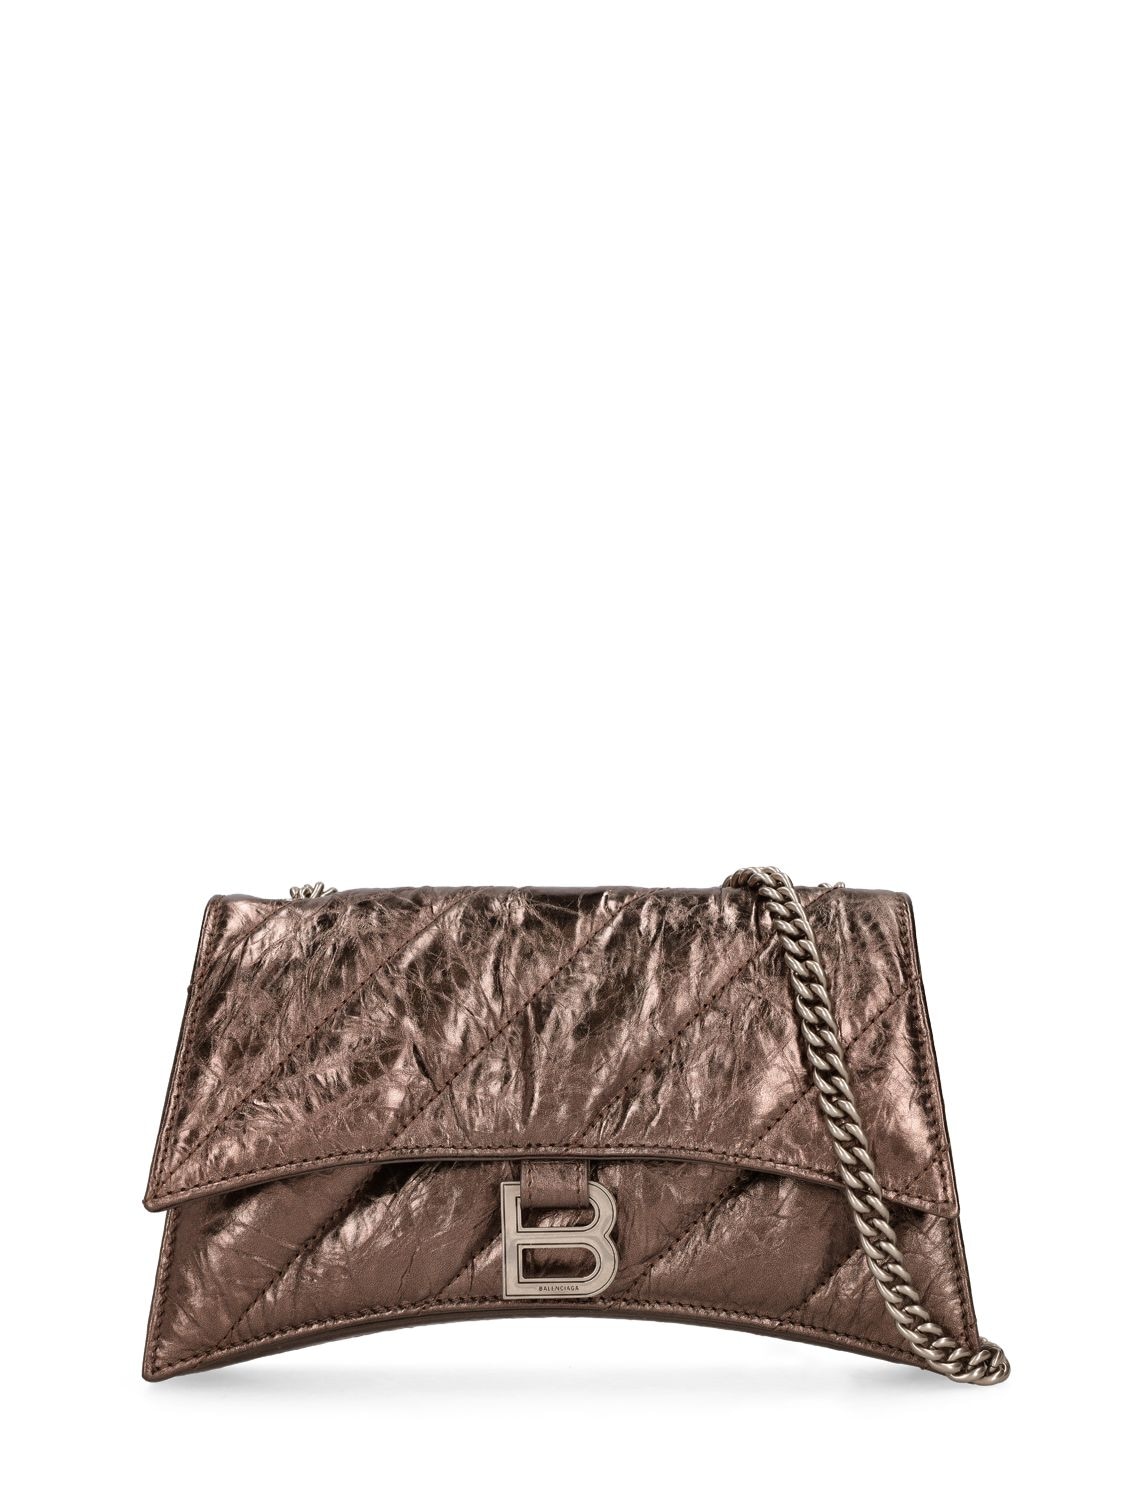 Image of S Crush Quilted Leather Shoulder Bag